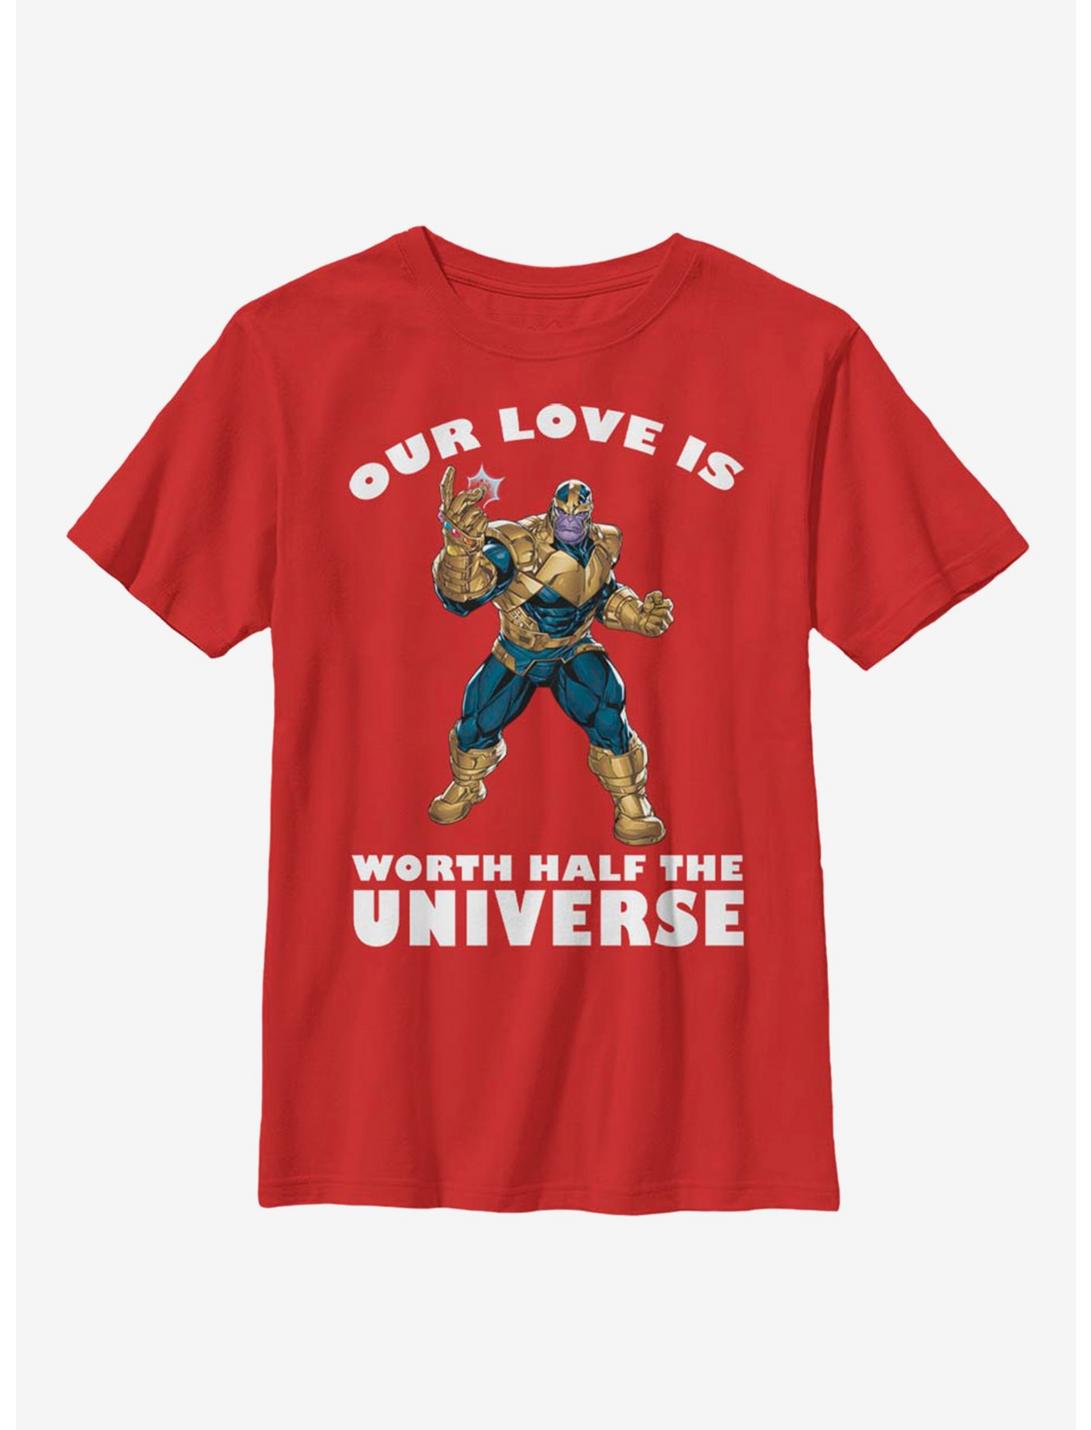 Marvel Avengers Thanos Universal Love Youth T-Shirt, RED, hi-res